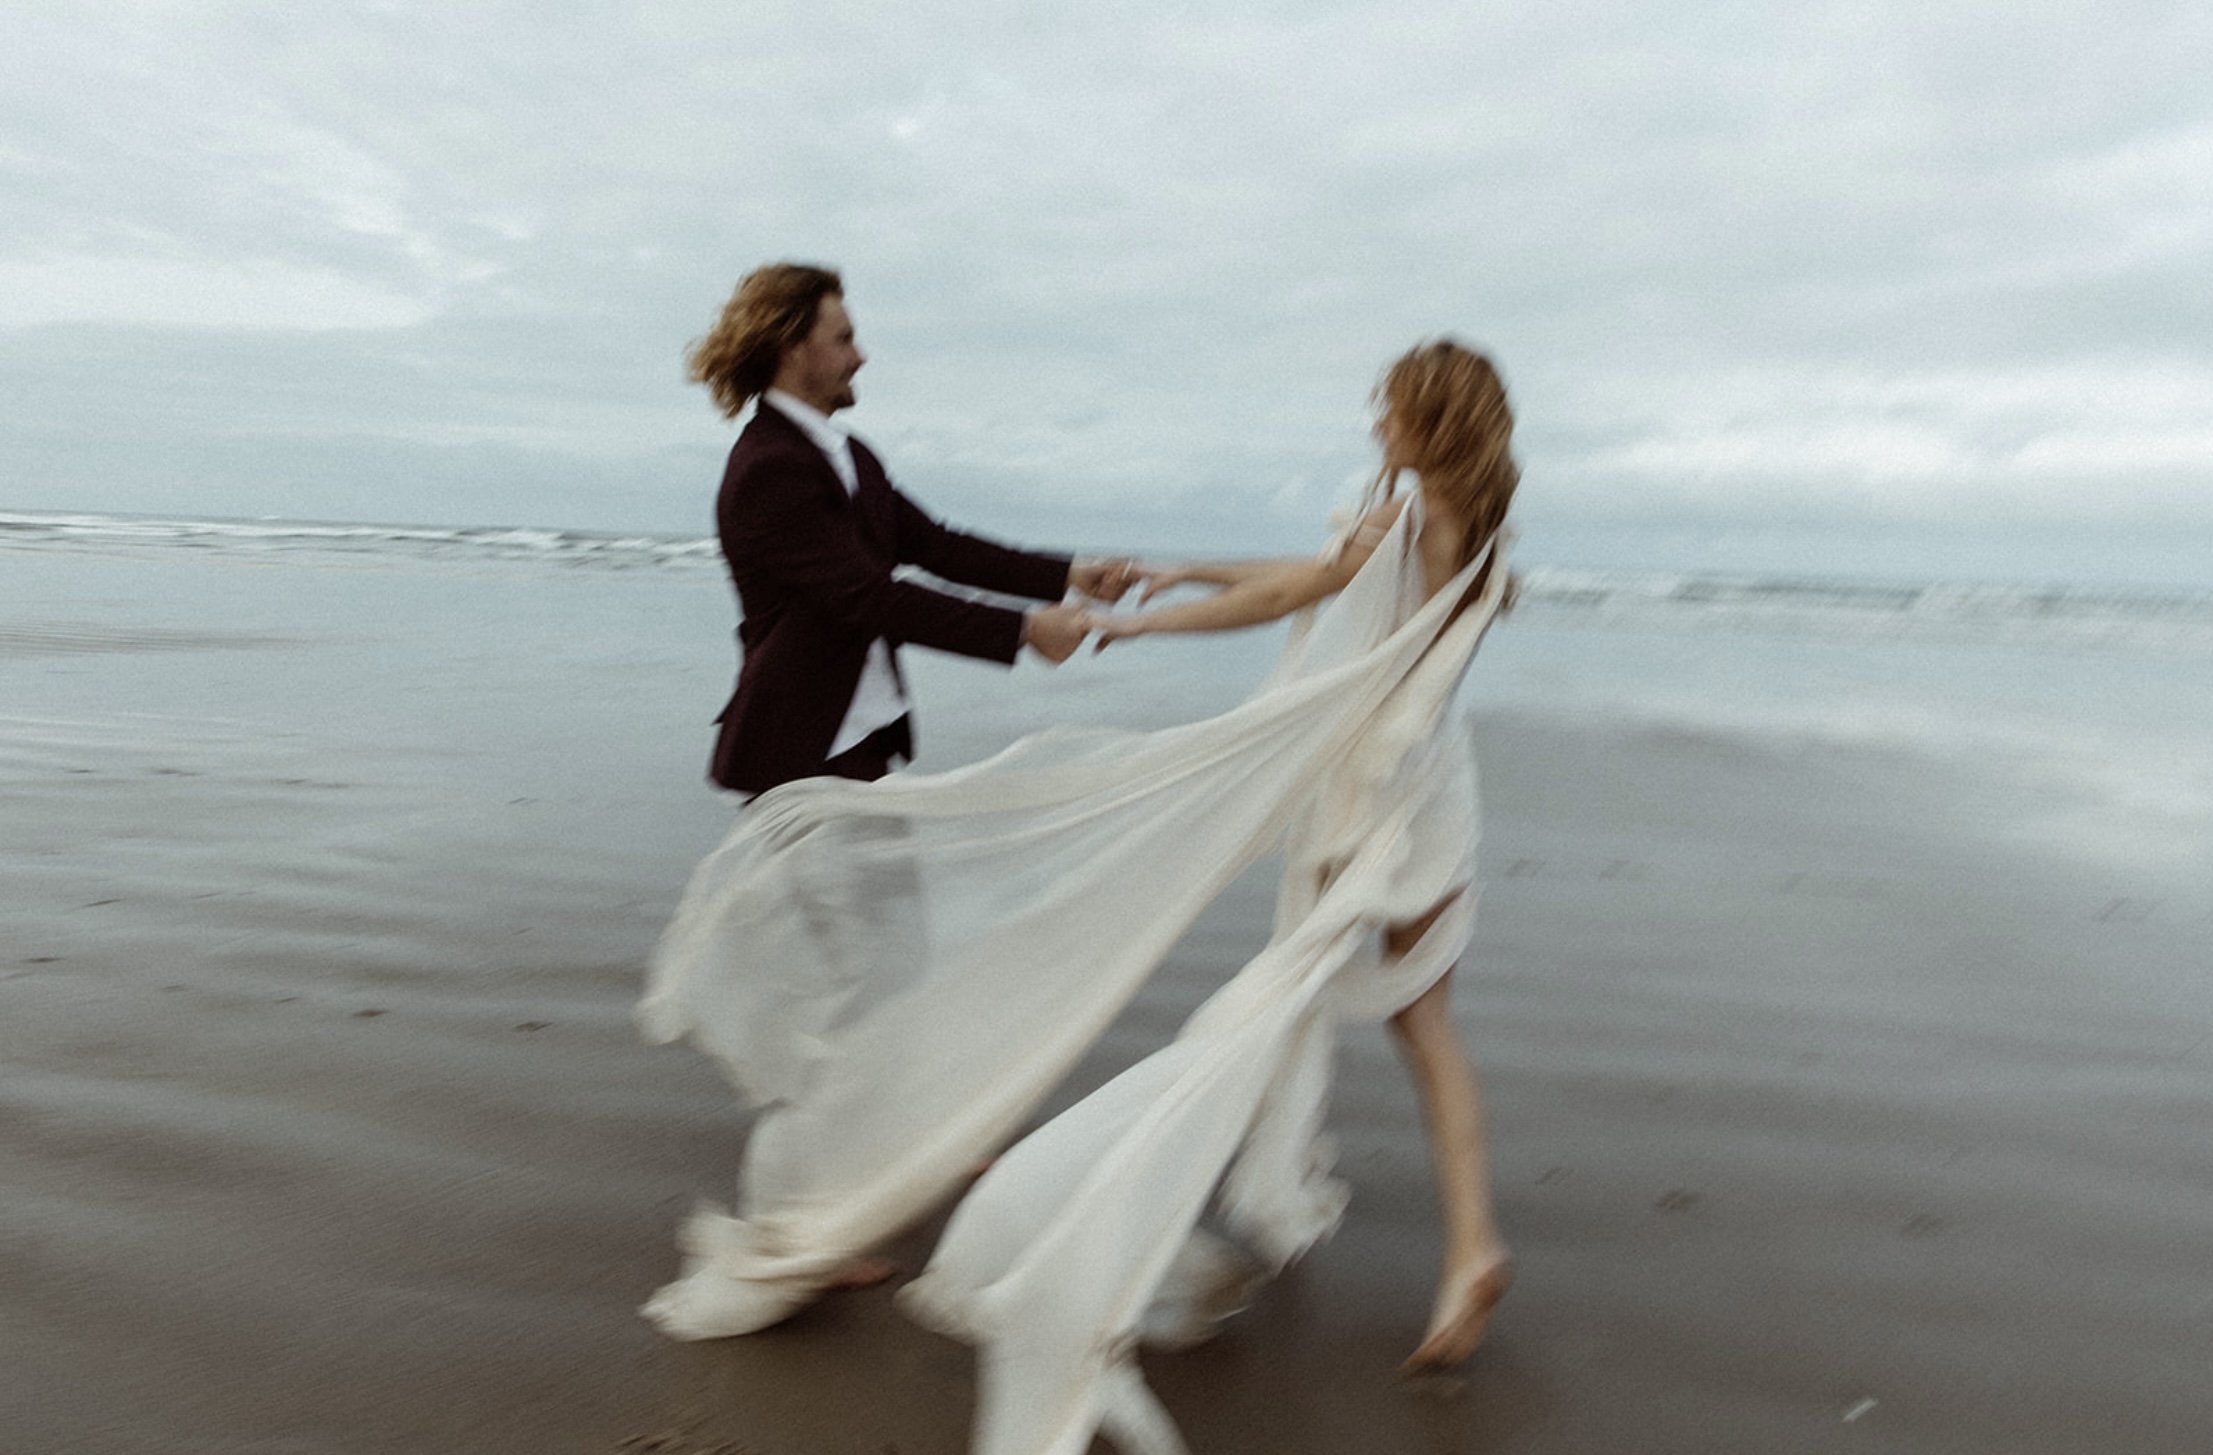   Mia wedding dress.  Elopement in Cannon Beach, Oregon Coast. Photo by  Madison Maltby Photography.   